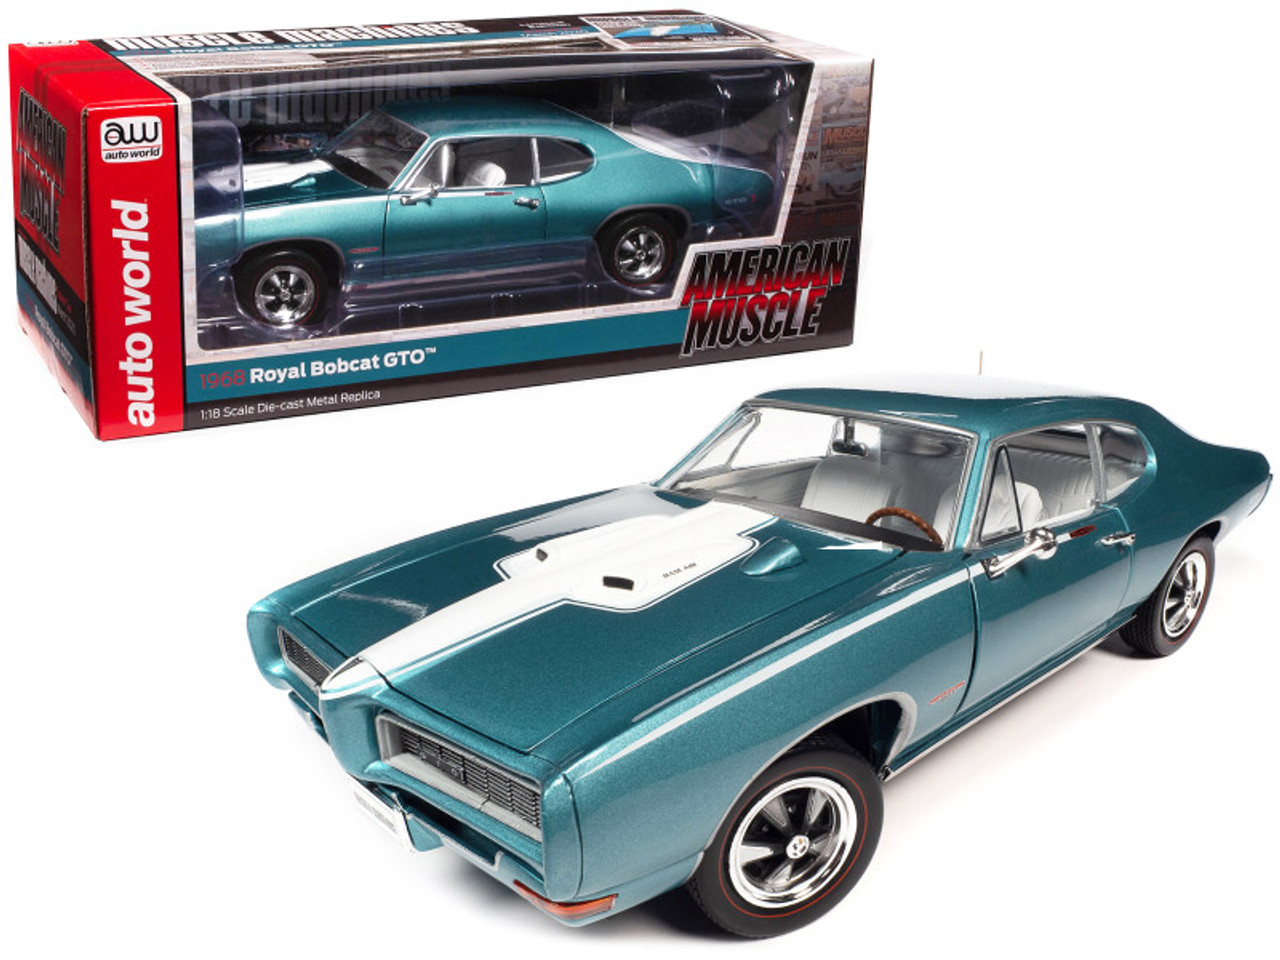 1/18 Auto World 1968 Pontiac Royal Bobcat GTO (Meridian Turquoise Blue & White with White Interior) "Hemmings Muscle Machines" Magazine Cover Car (March 2020) Diecast Car Model